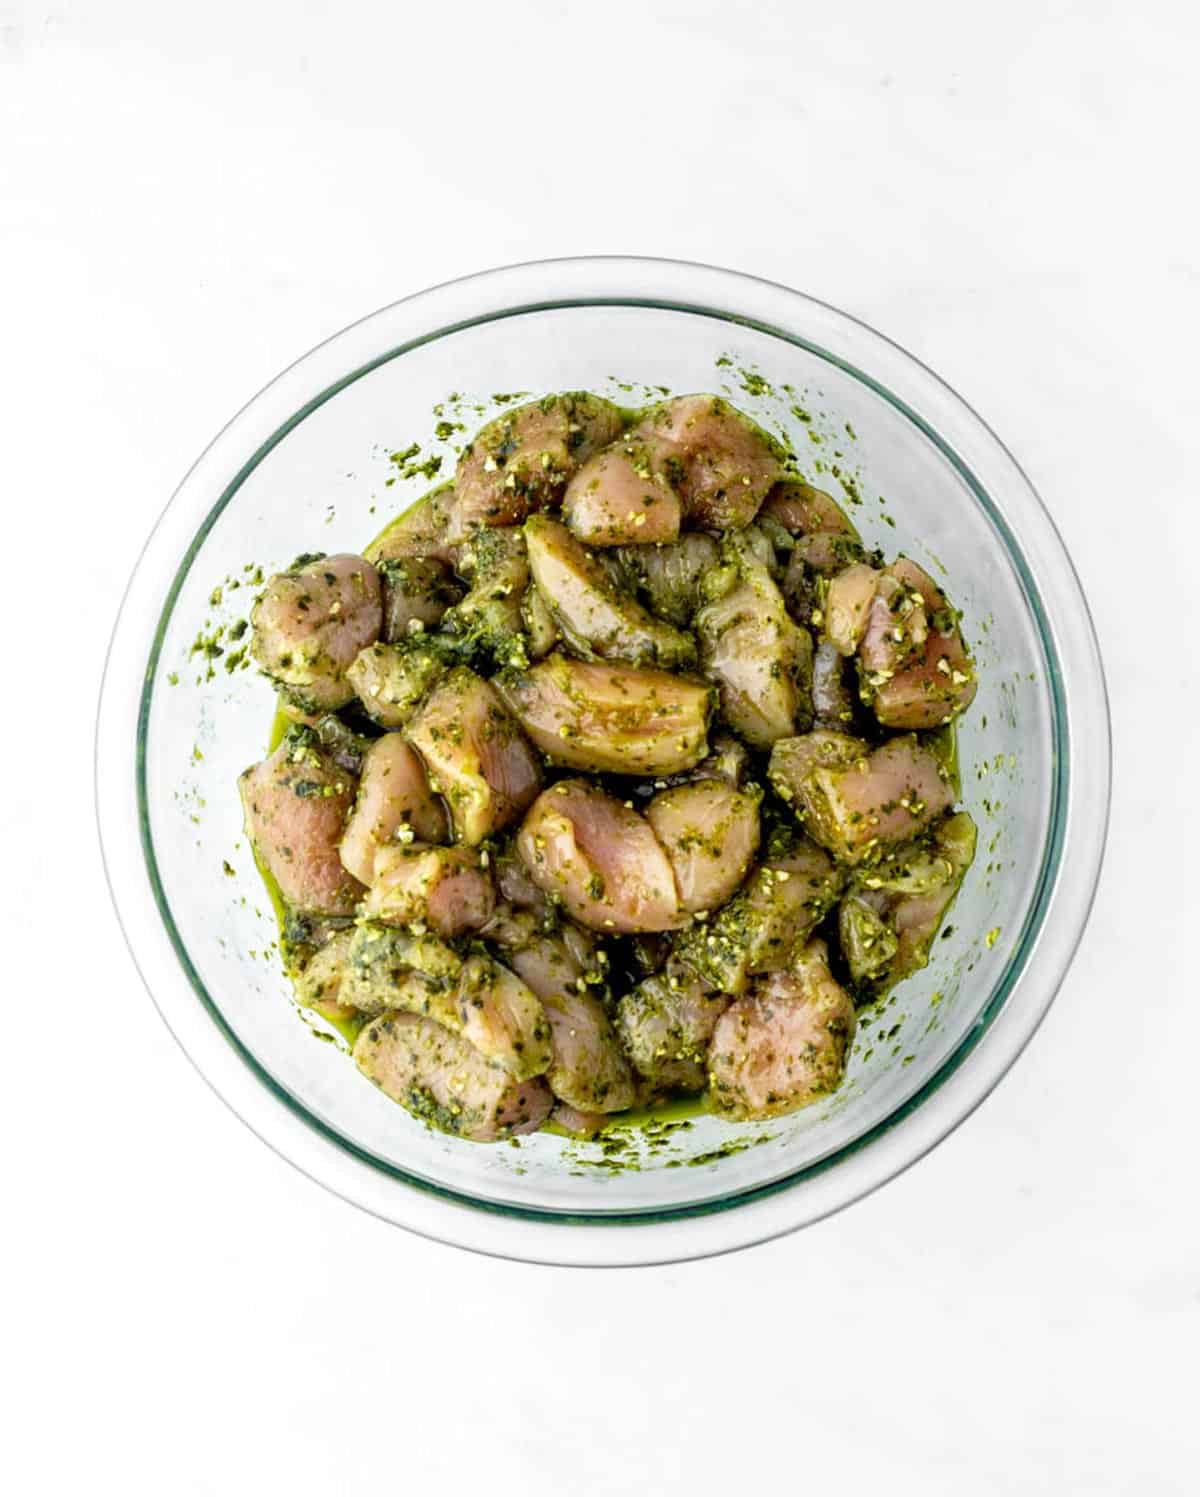 Chicken pieces tossed together with pesto.